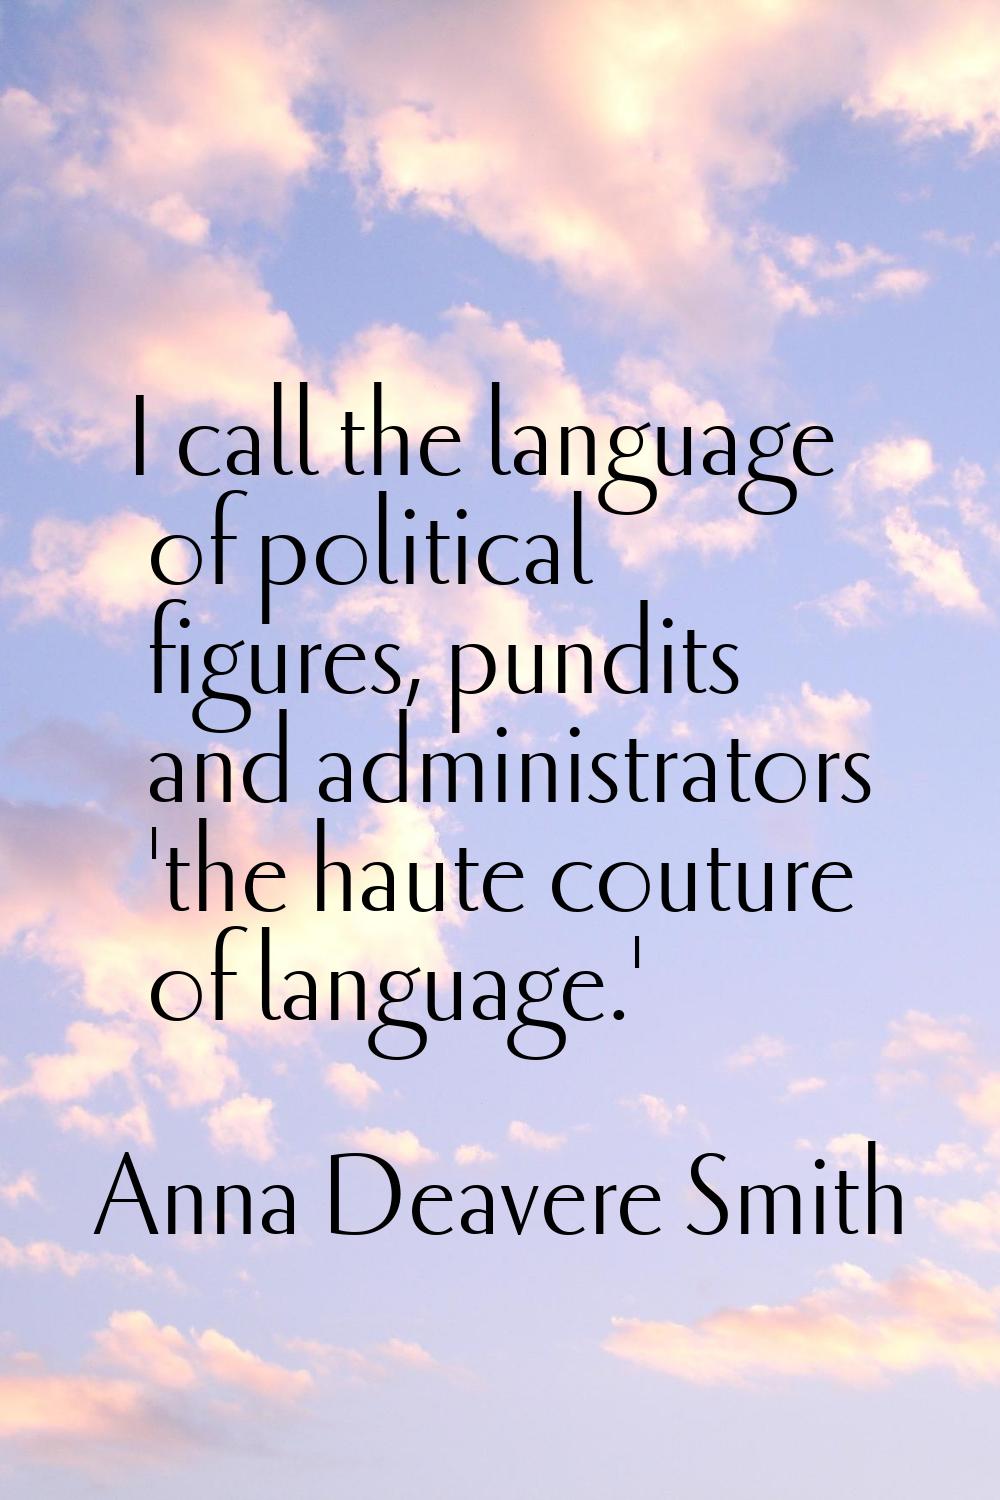 I call the language of political figures, pundits and administrators 'the haute couture of language